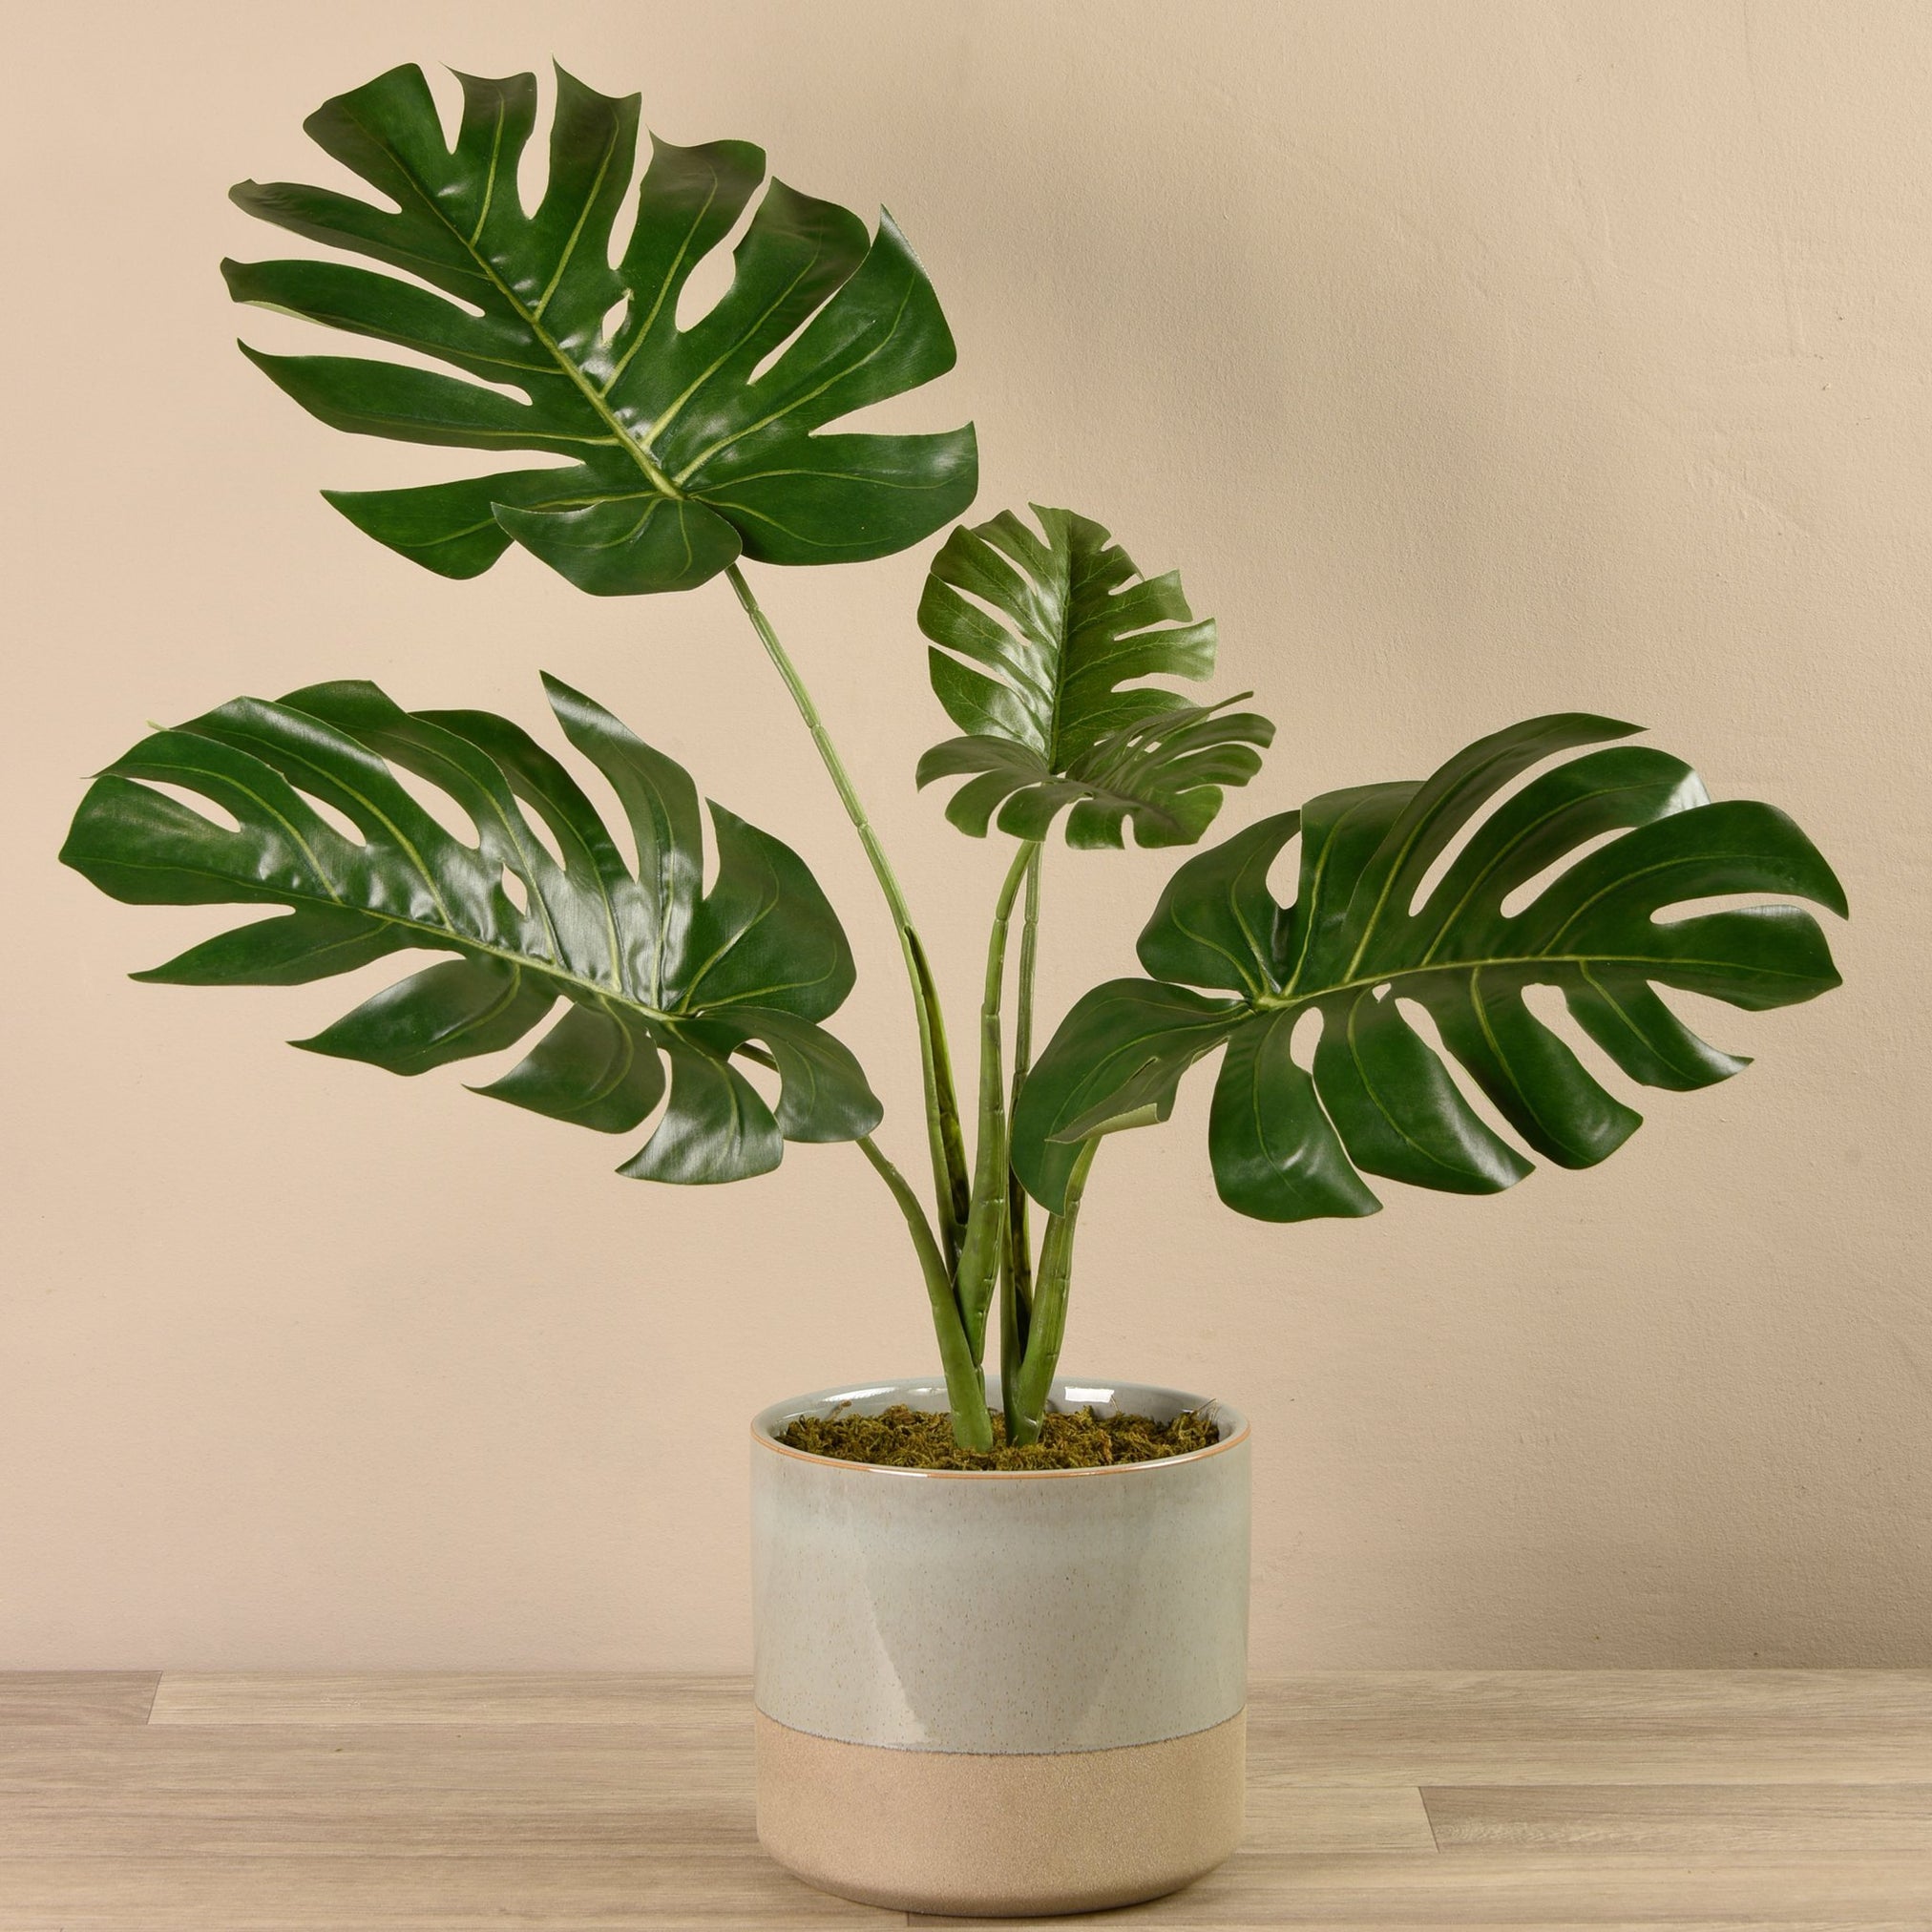 Bloomr-USA Plants Potted Monstera Plant artificial flowers artificial